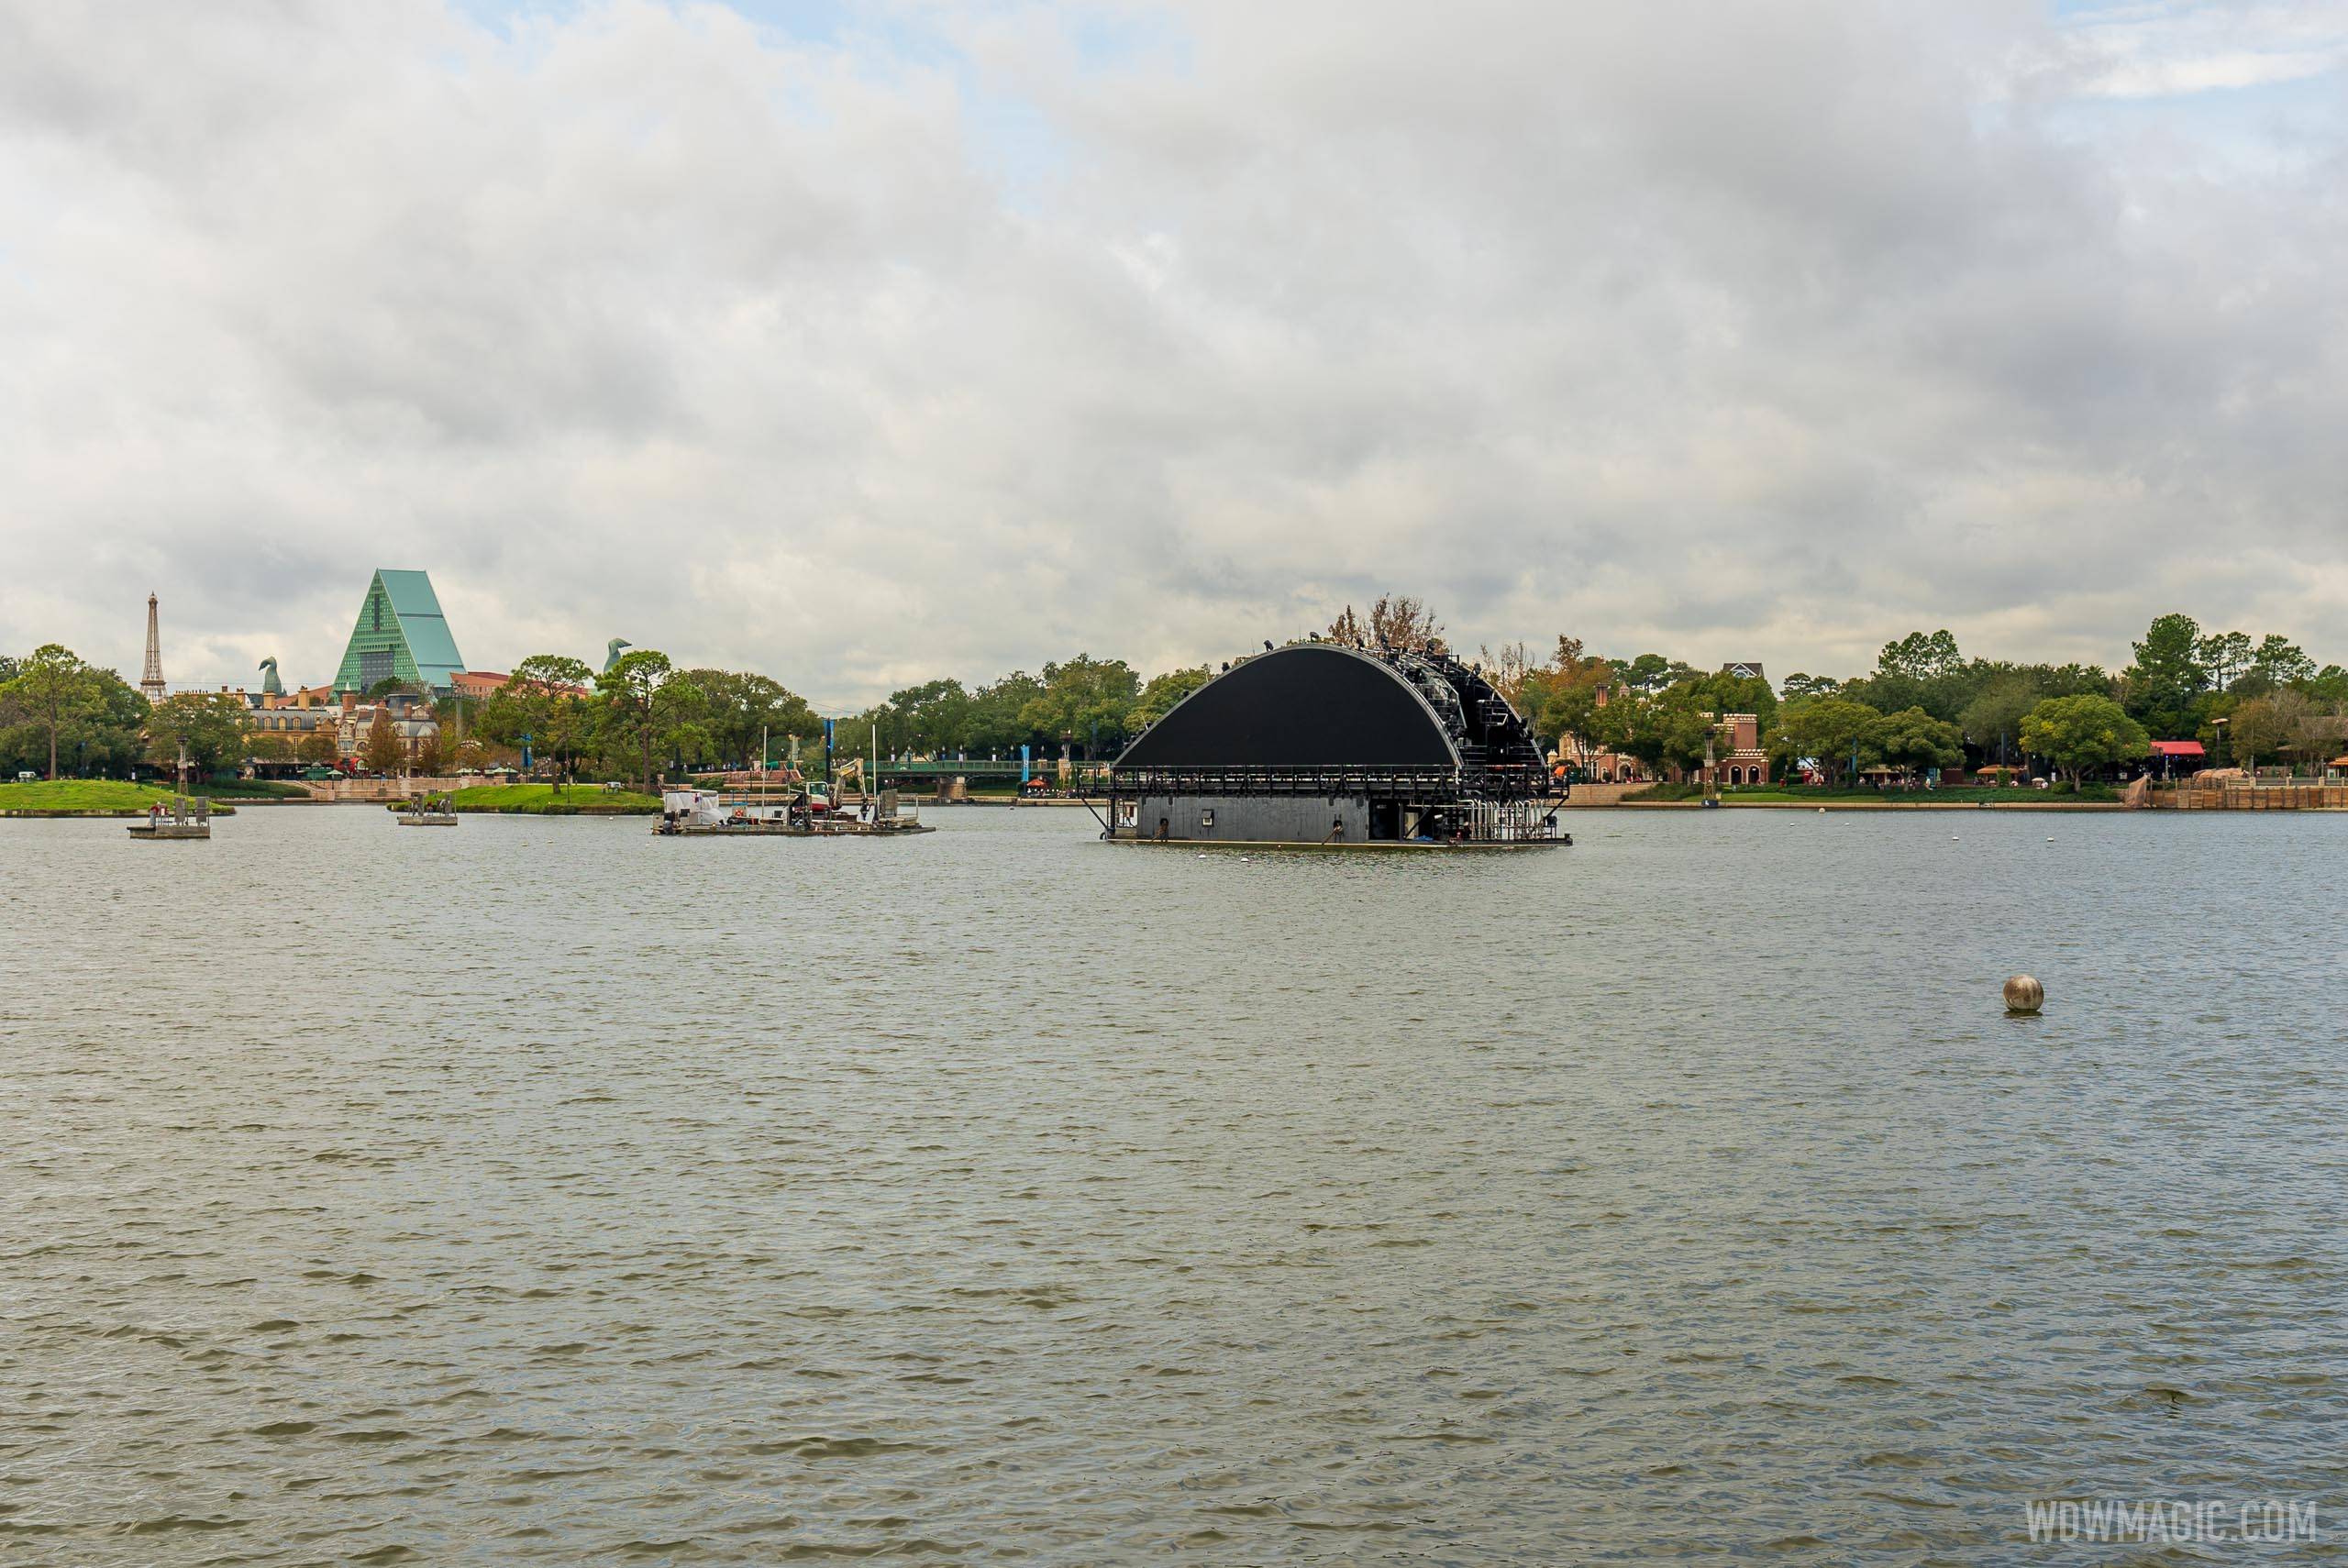 50mm 'Natural view' of the Harmonious show barge on World Showcase Lagoon